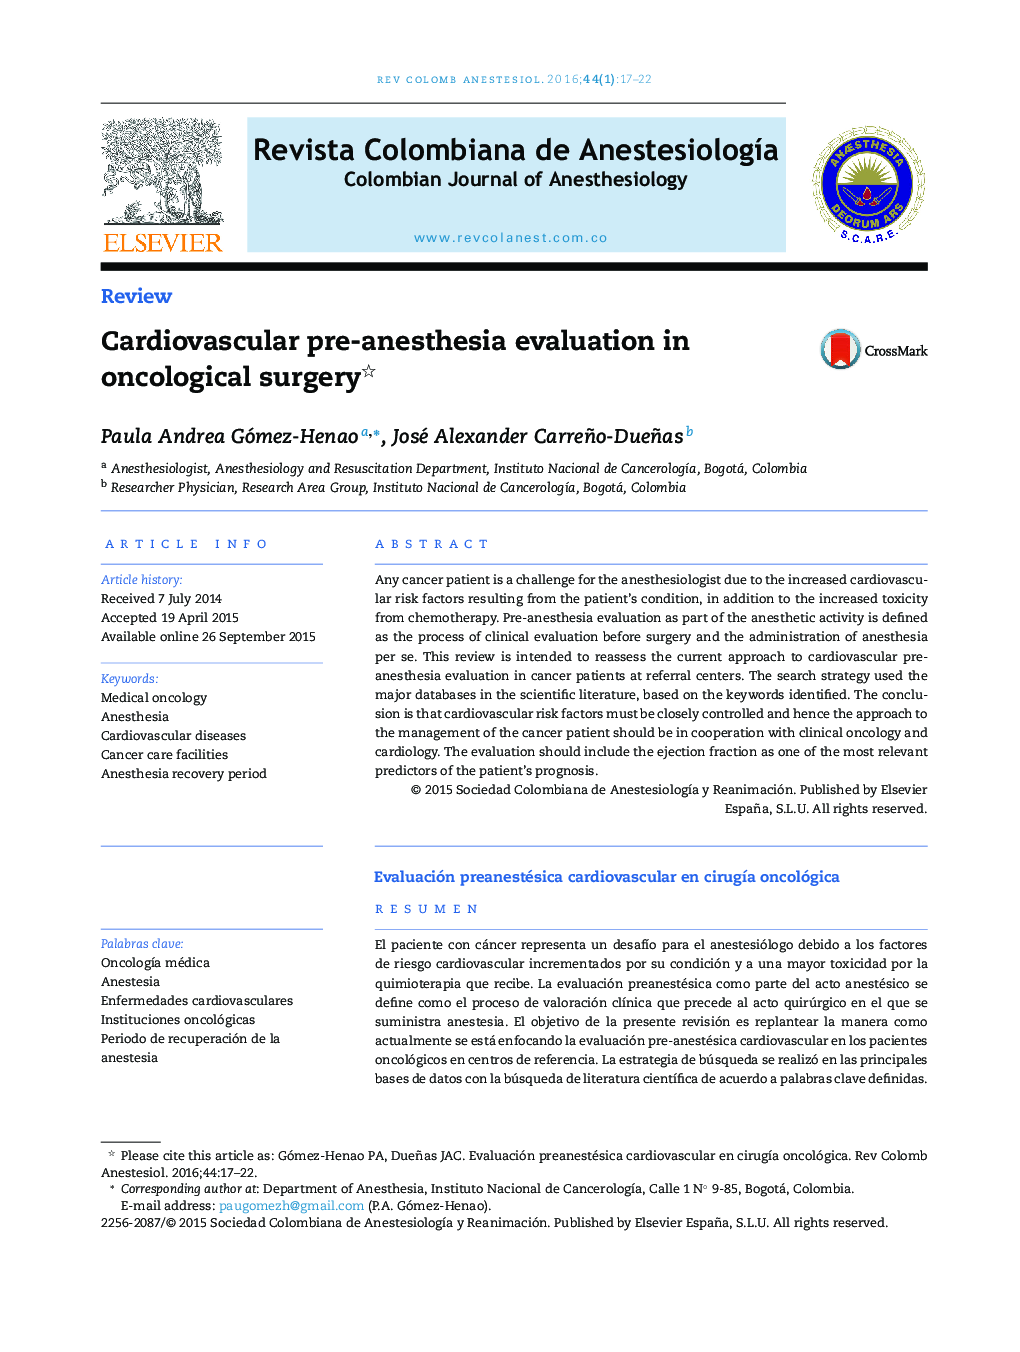 Cardiovascular pre-anesthesia evaluation in oncological surgery 